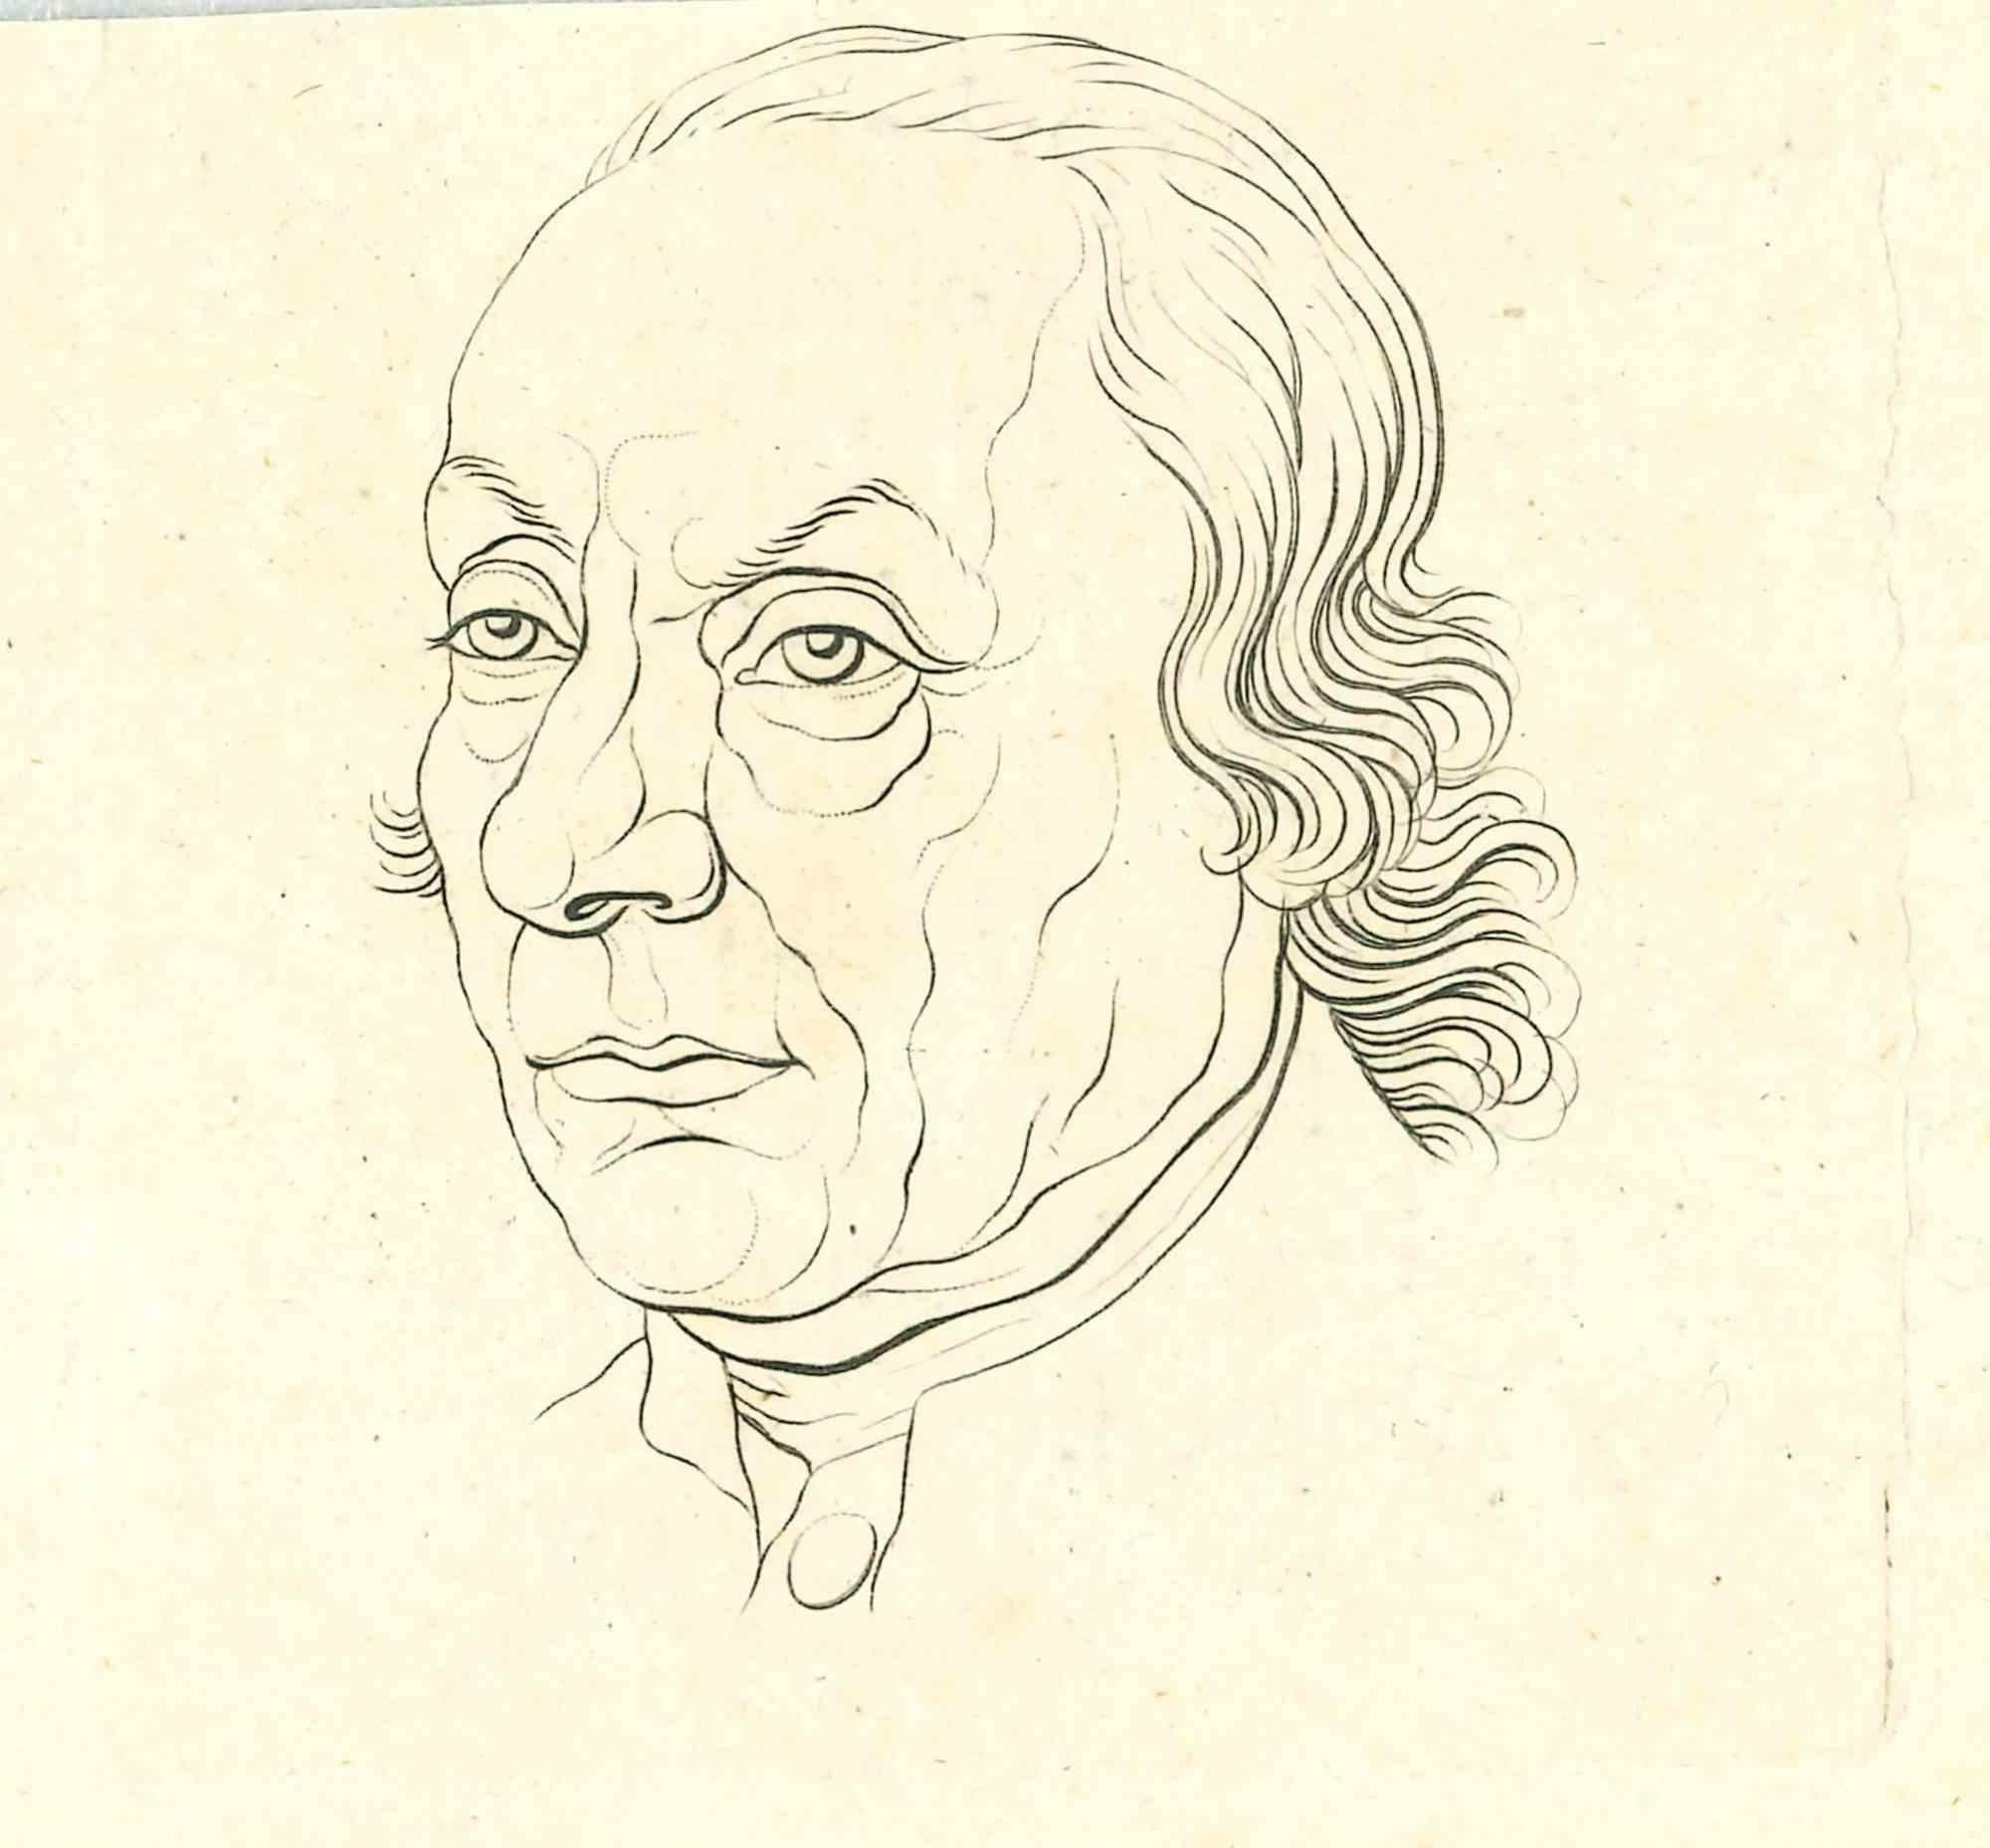 The Physiognomy - Portrait is an original etching artwork realized by Thomas Holloway for Johann Caspar Lavater's "Essays on Physiognomy, Designed to Promote the Knowledge and the Love of Mankind", London, Bensley, 1810. 

Good conditions.

With